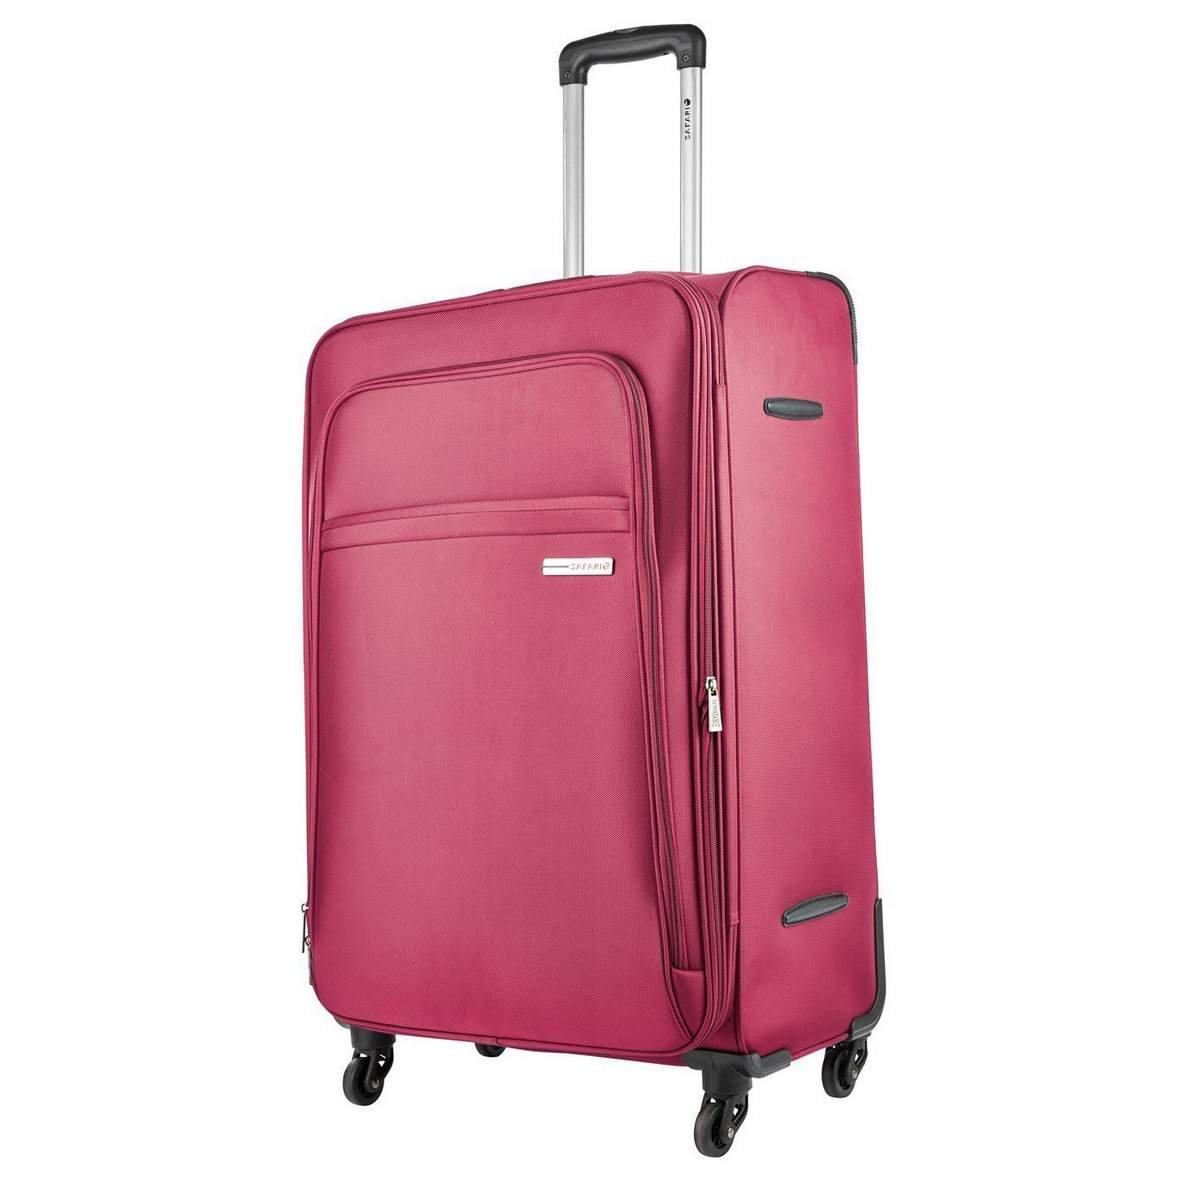 Safari Soft Luggage Bags Set of 3| Number Lock| 4W Trolley Bag |  Polycarbonate Soft Body Suitcase| Size- Cabin+Medium+Large (79 cm,69 cm,59  cm) (Maroon) - Price History